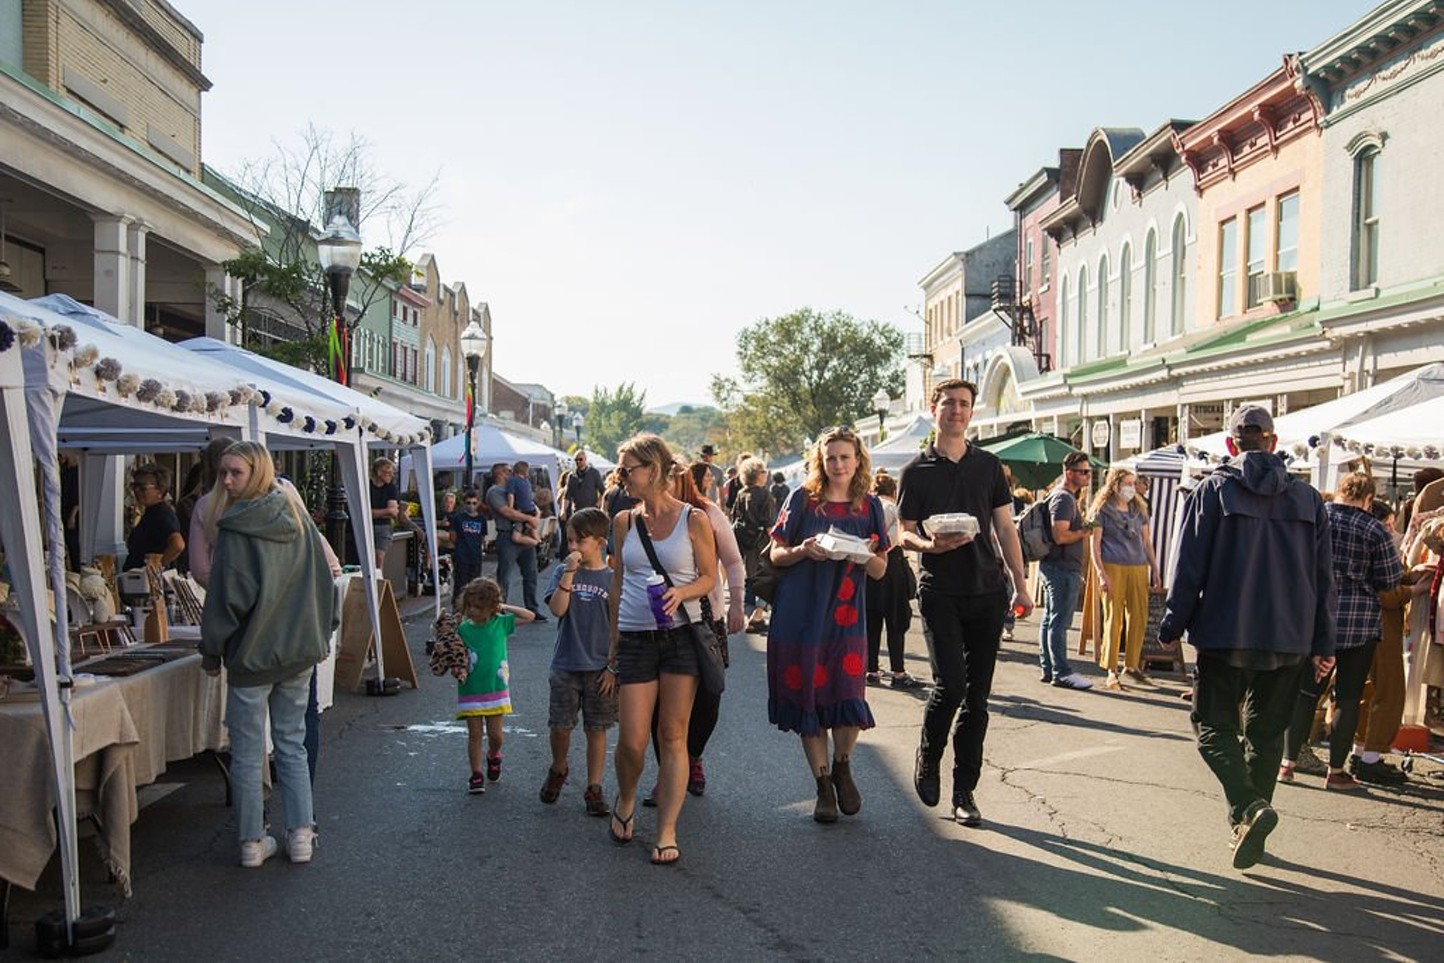 Fall Hudson Valley Craft Festivals and Makers Markets